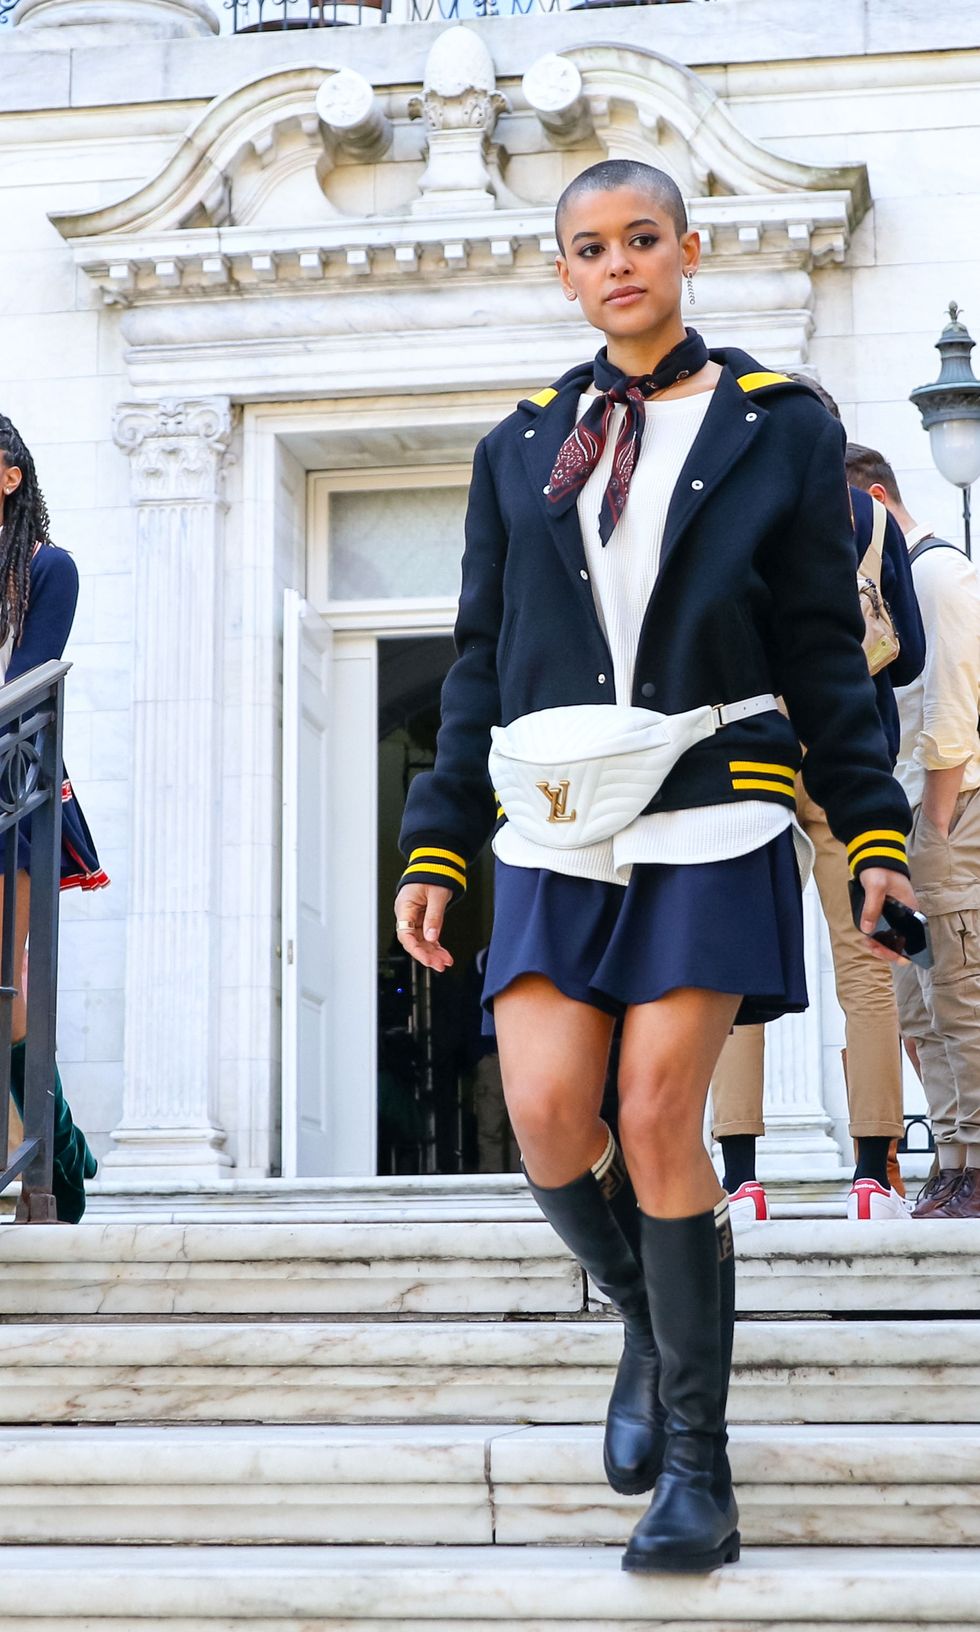 How To Re-create The 'Gossip Girl' Reboot Outfits Sustainably – Part 3 -  Ethically Dressed